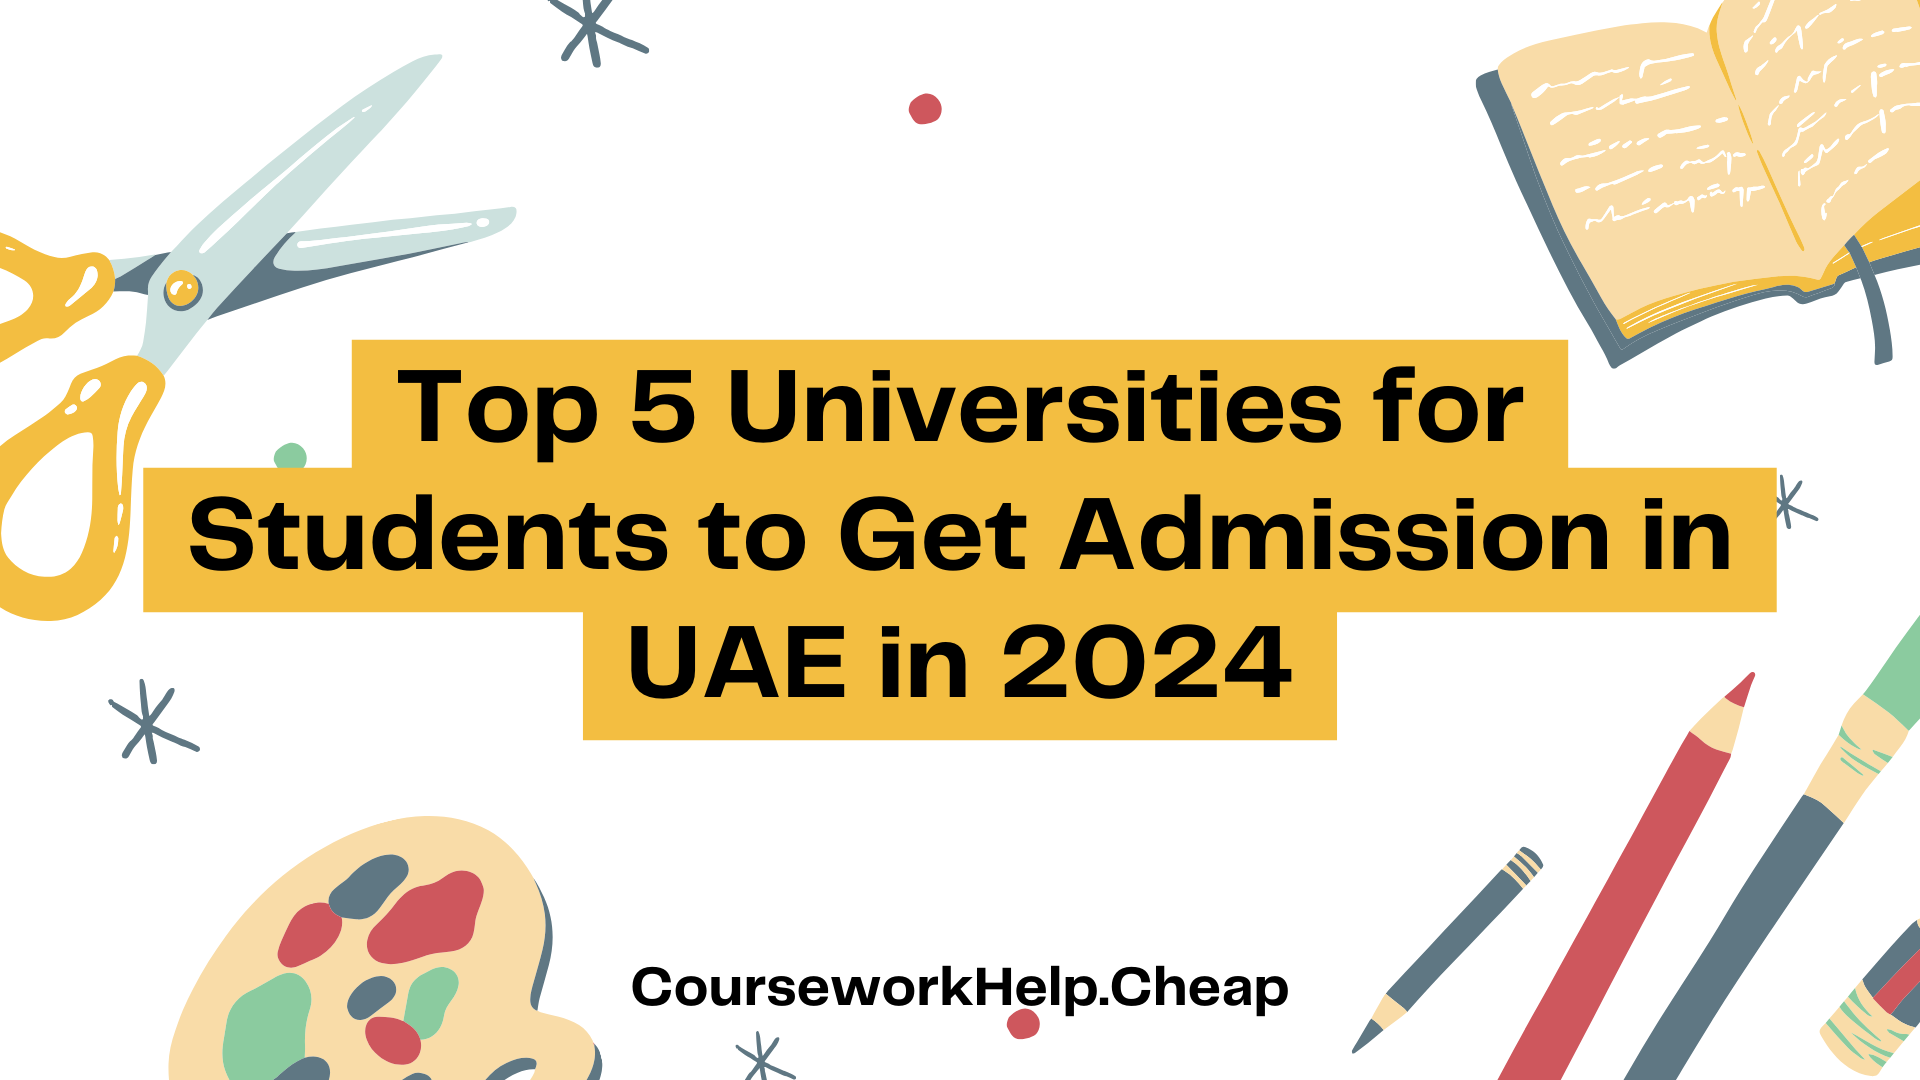 Top 5 Universities of UAE for students to Get Admission in 2024